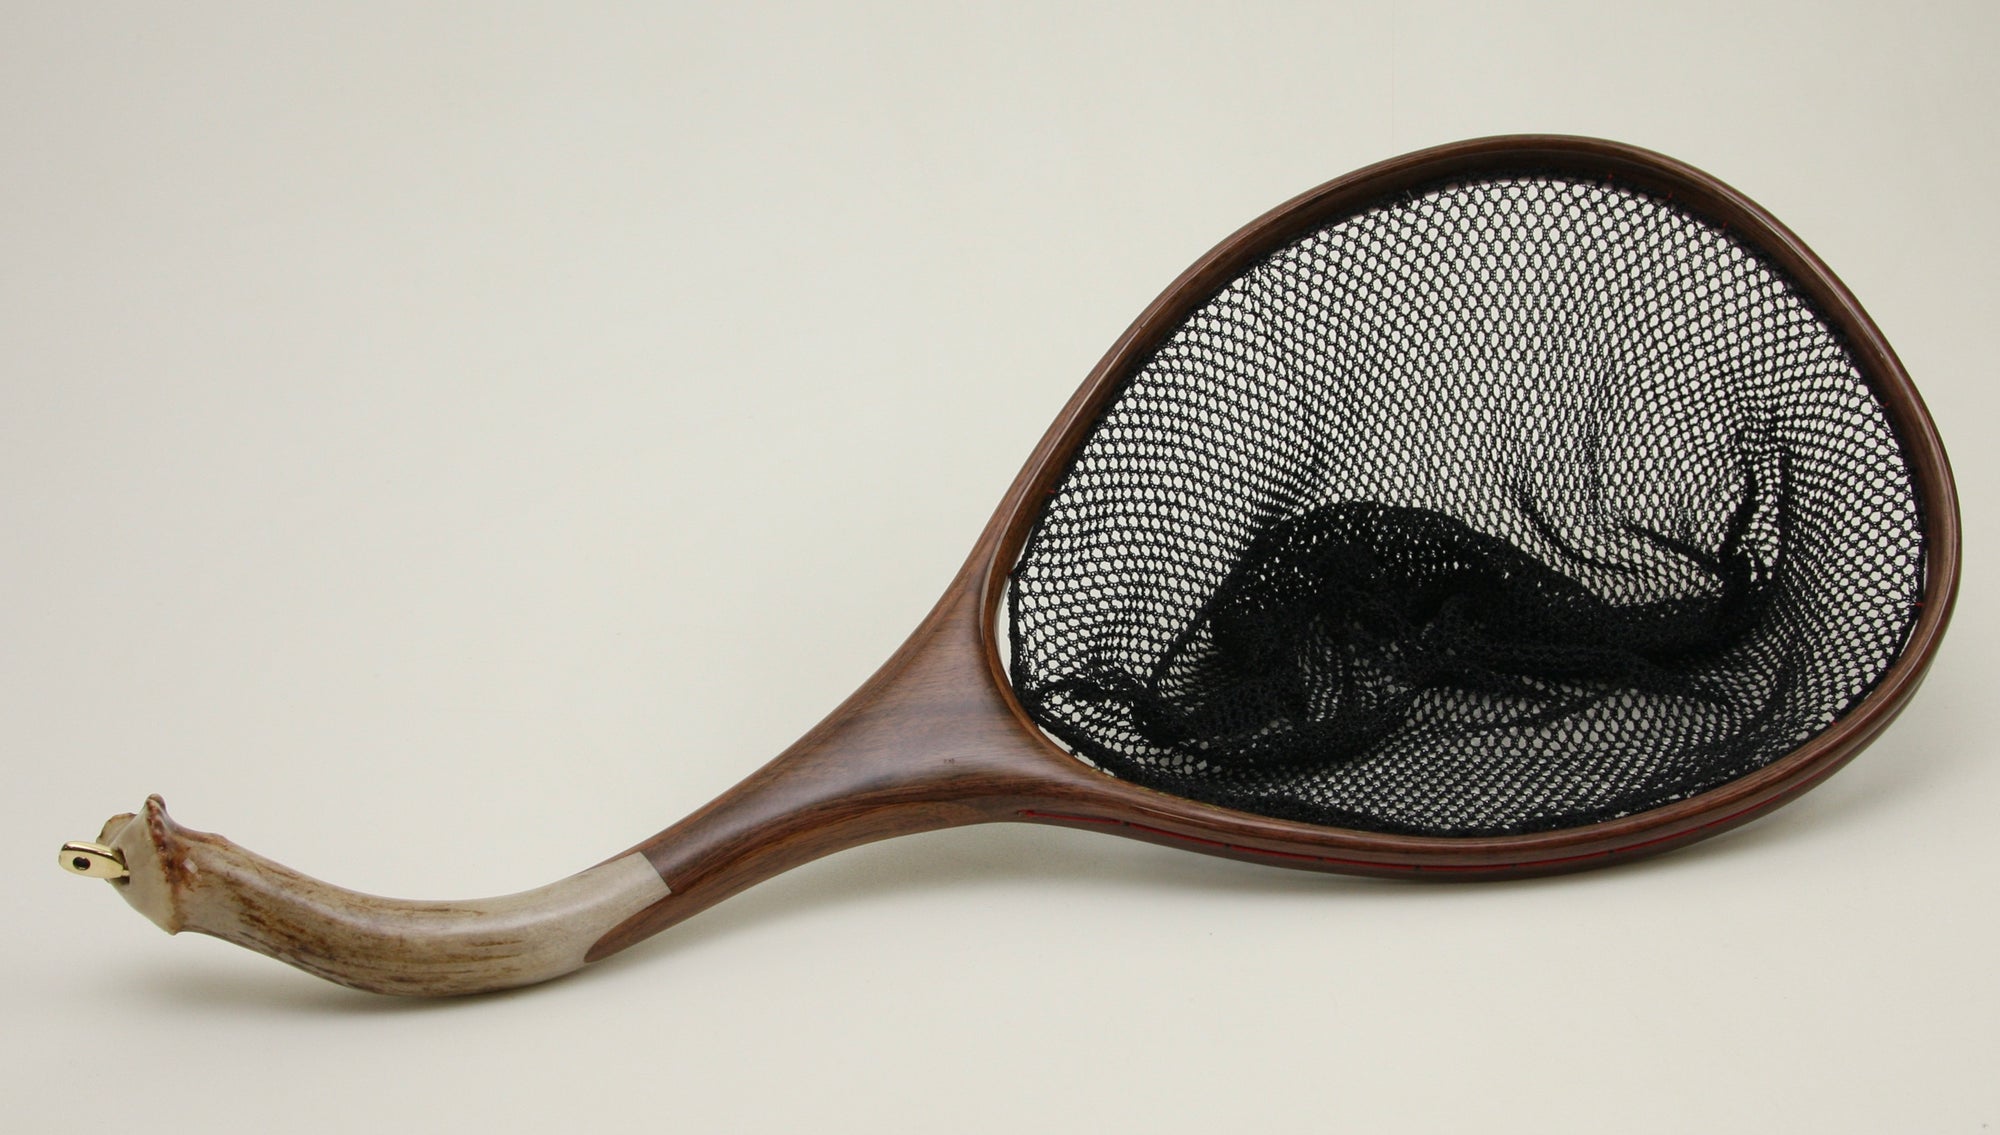 Medium sized Fly Fishing Net with Deer Antler and Walnut